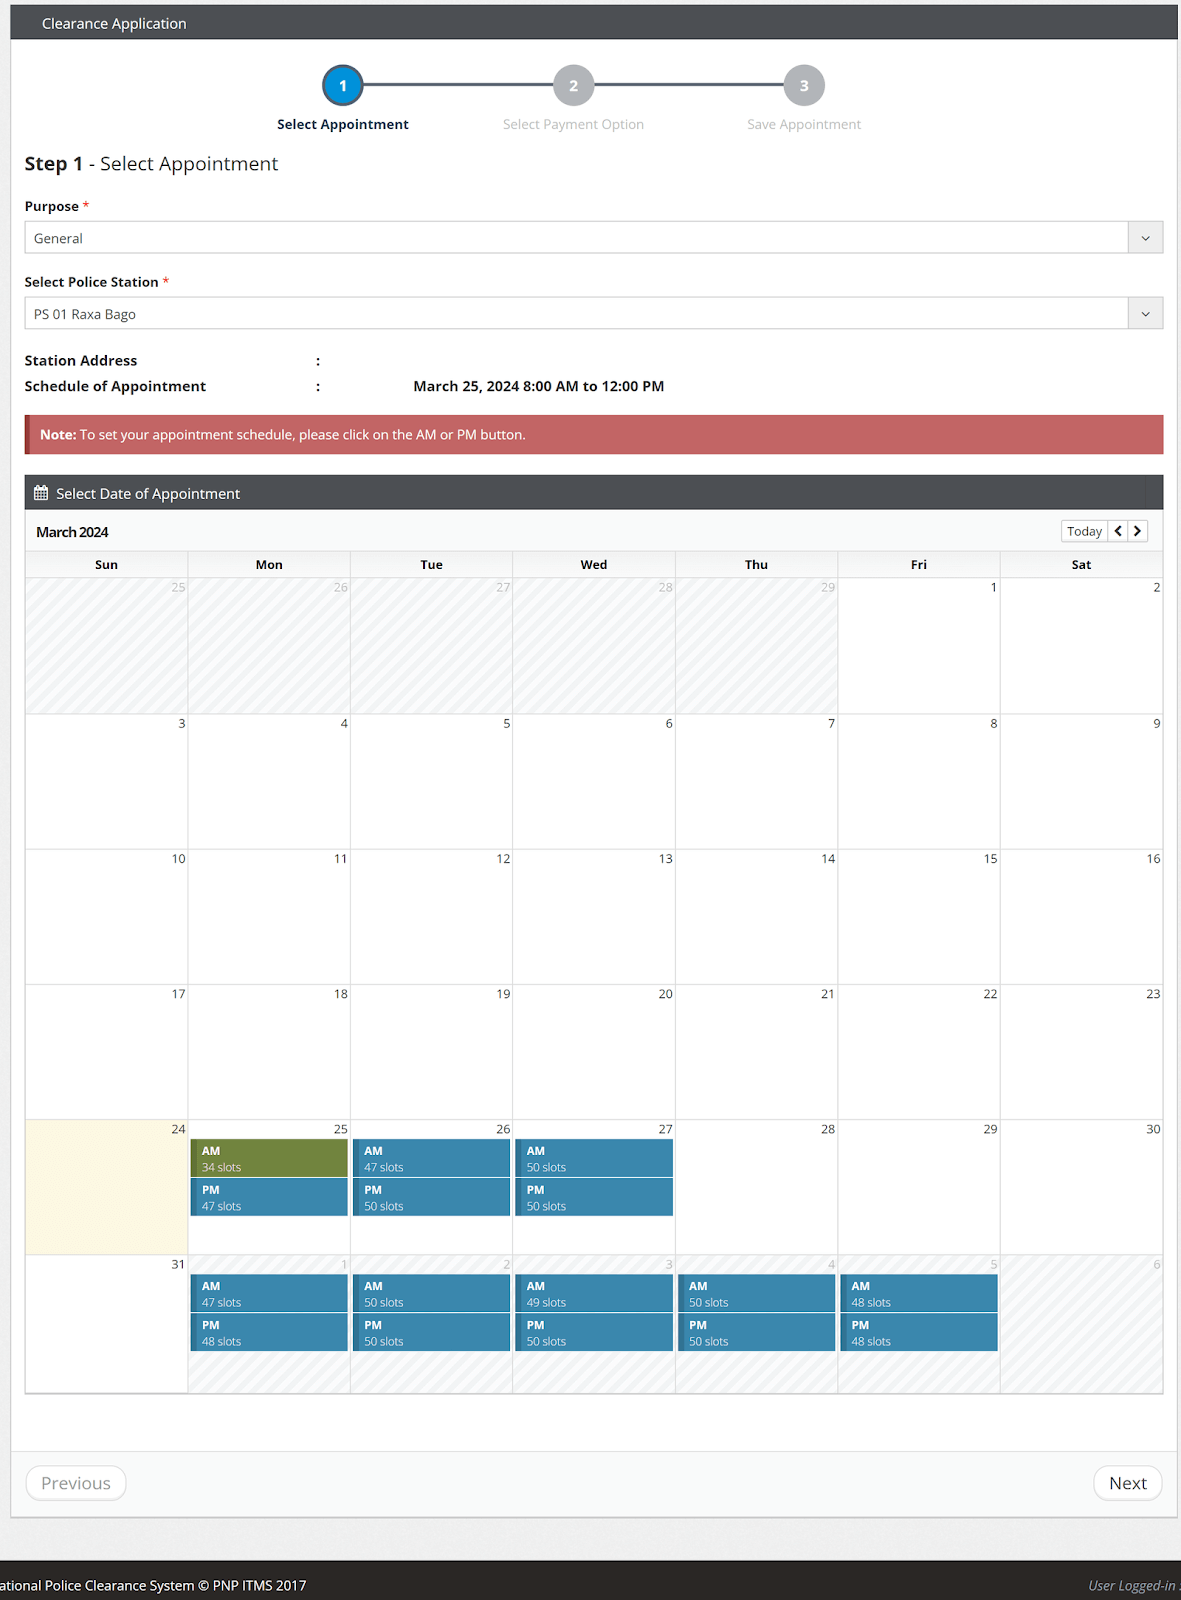 select appointment date